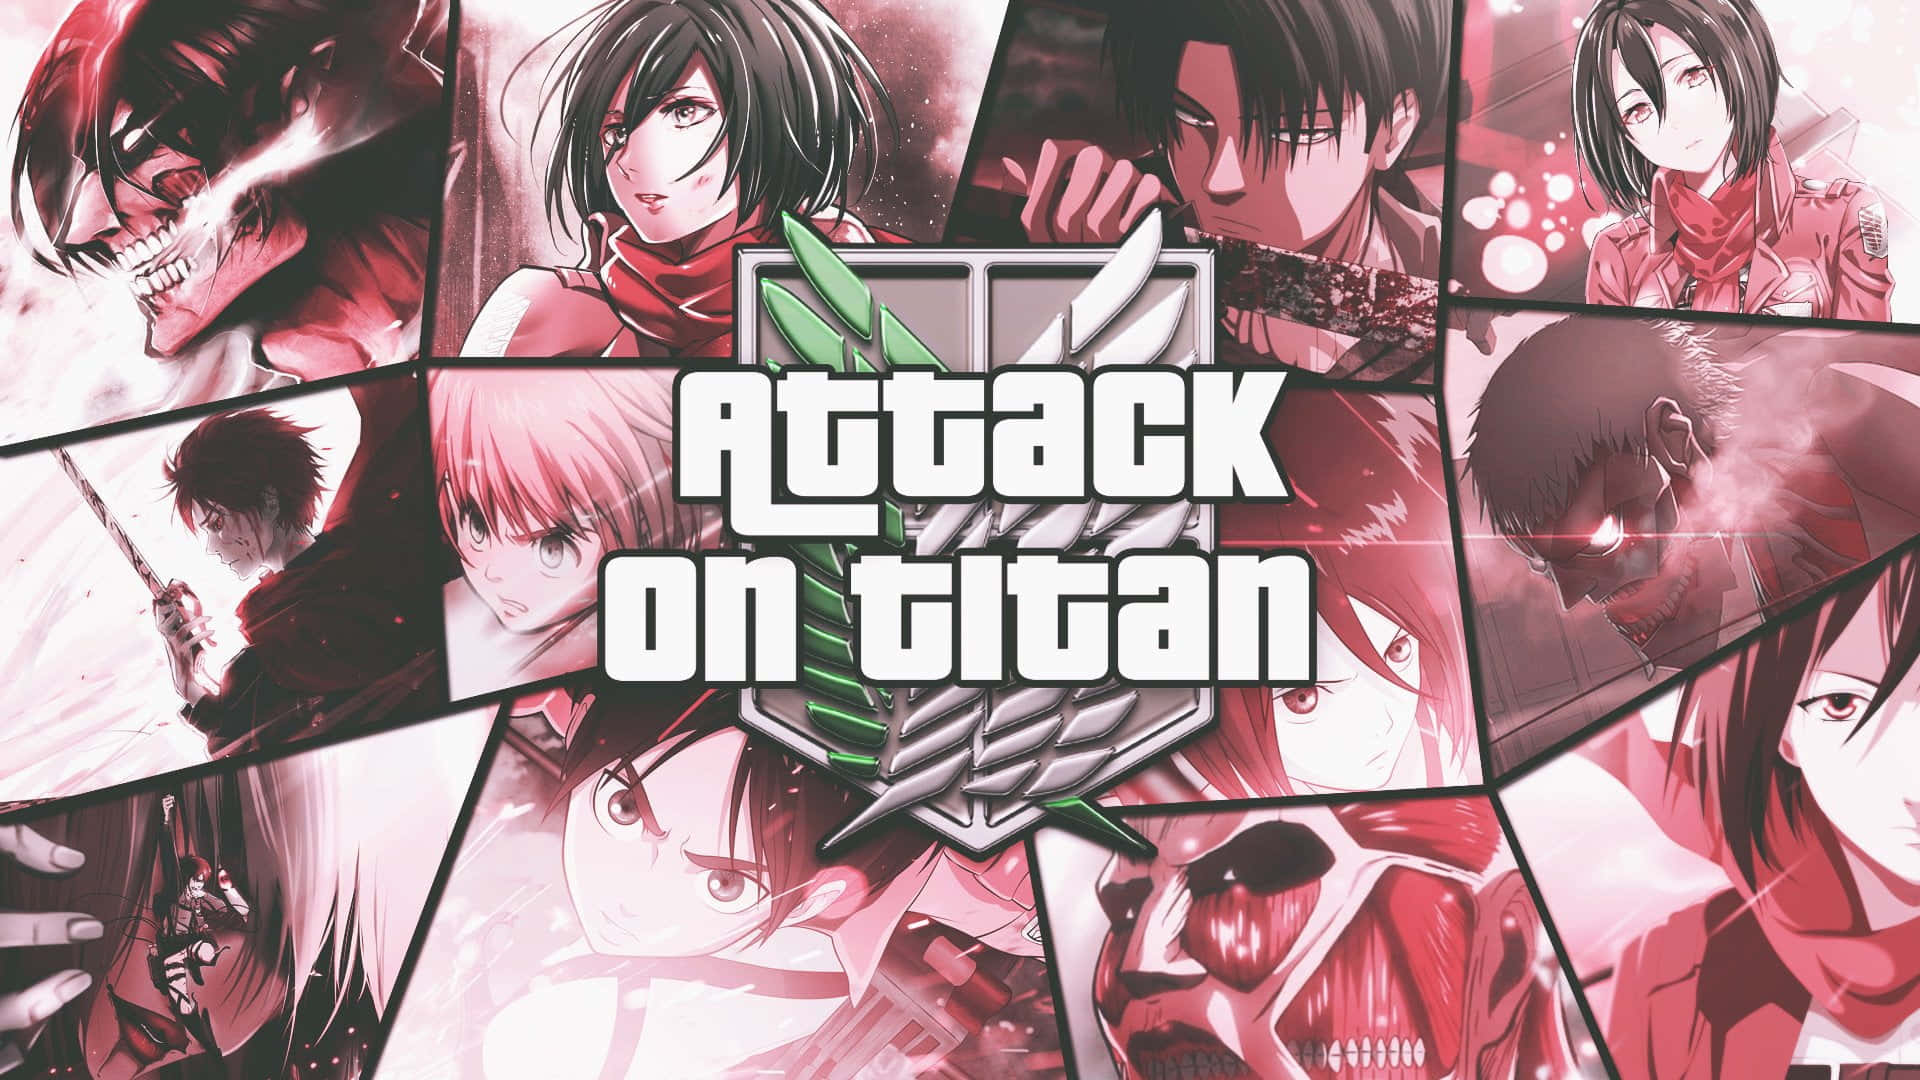 Join the fight with this Attack on Titan Poster! Wallpaper